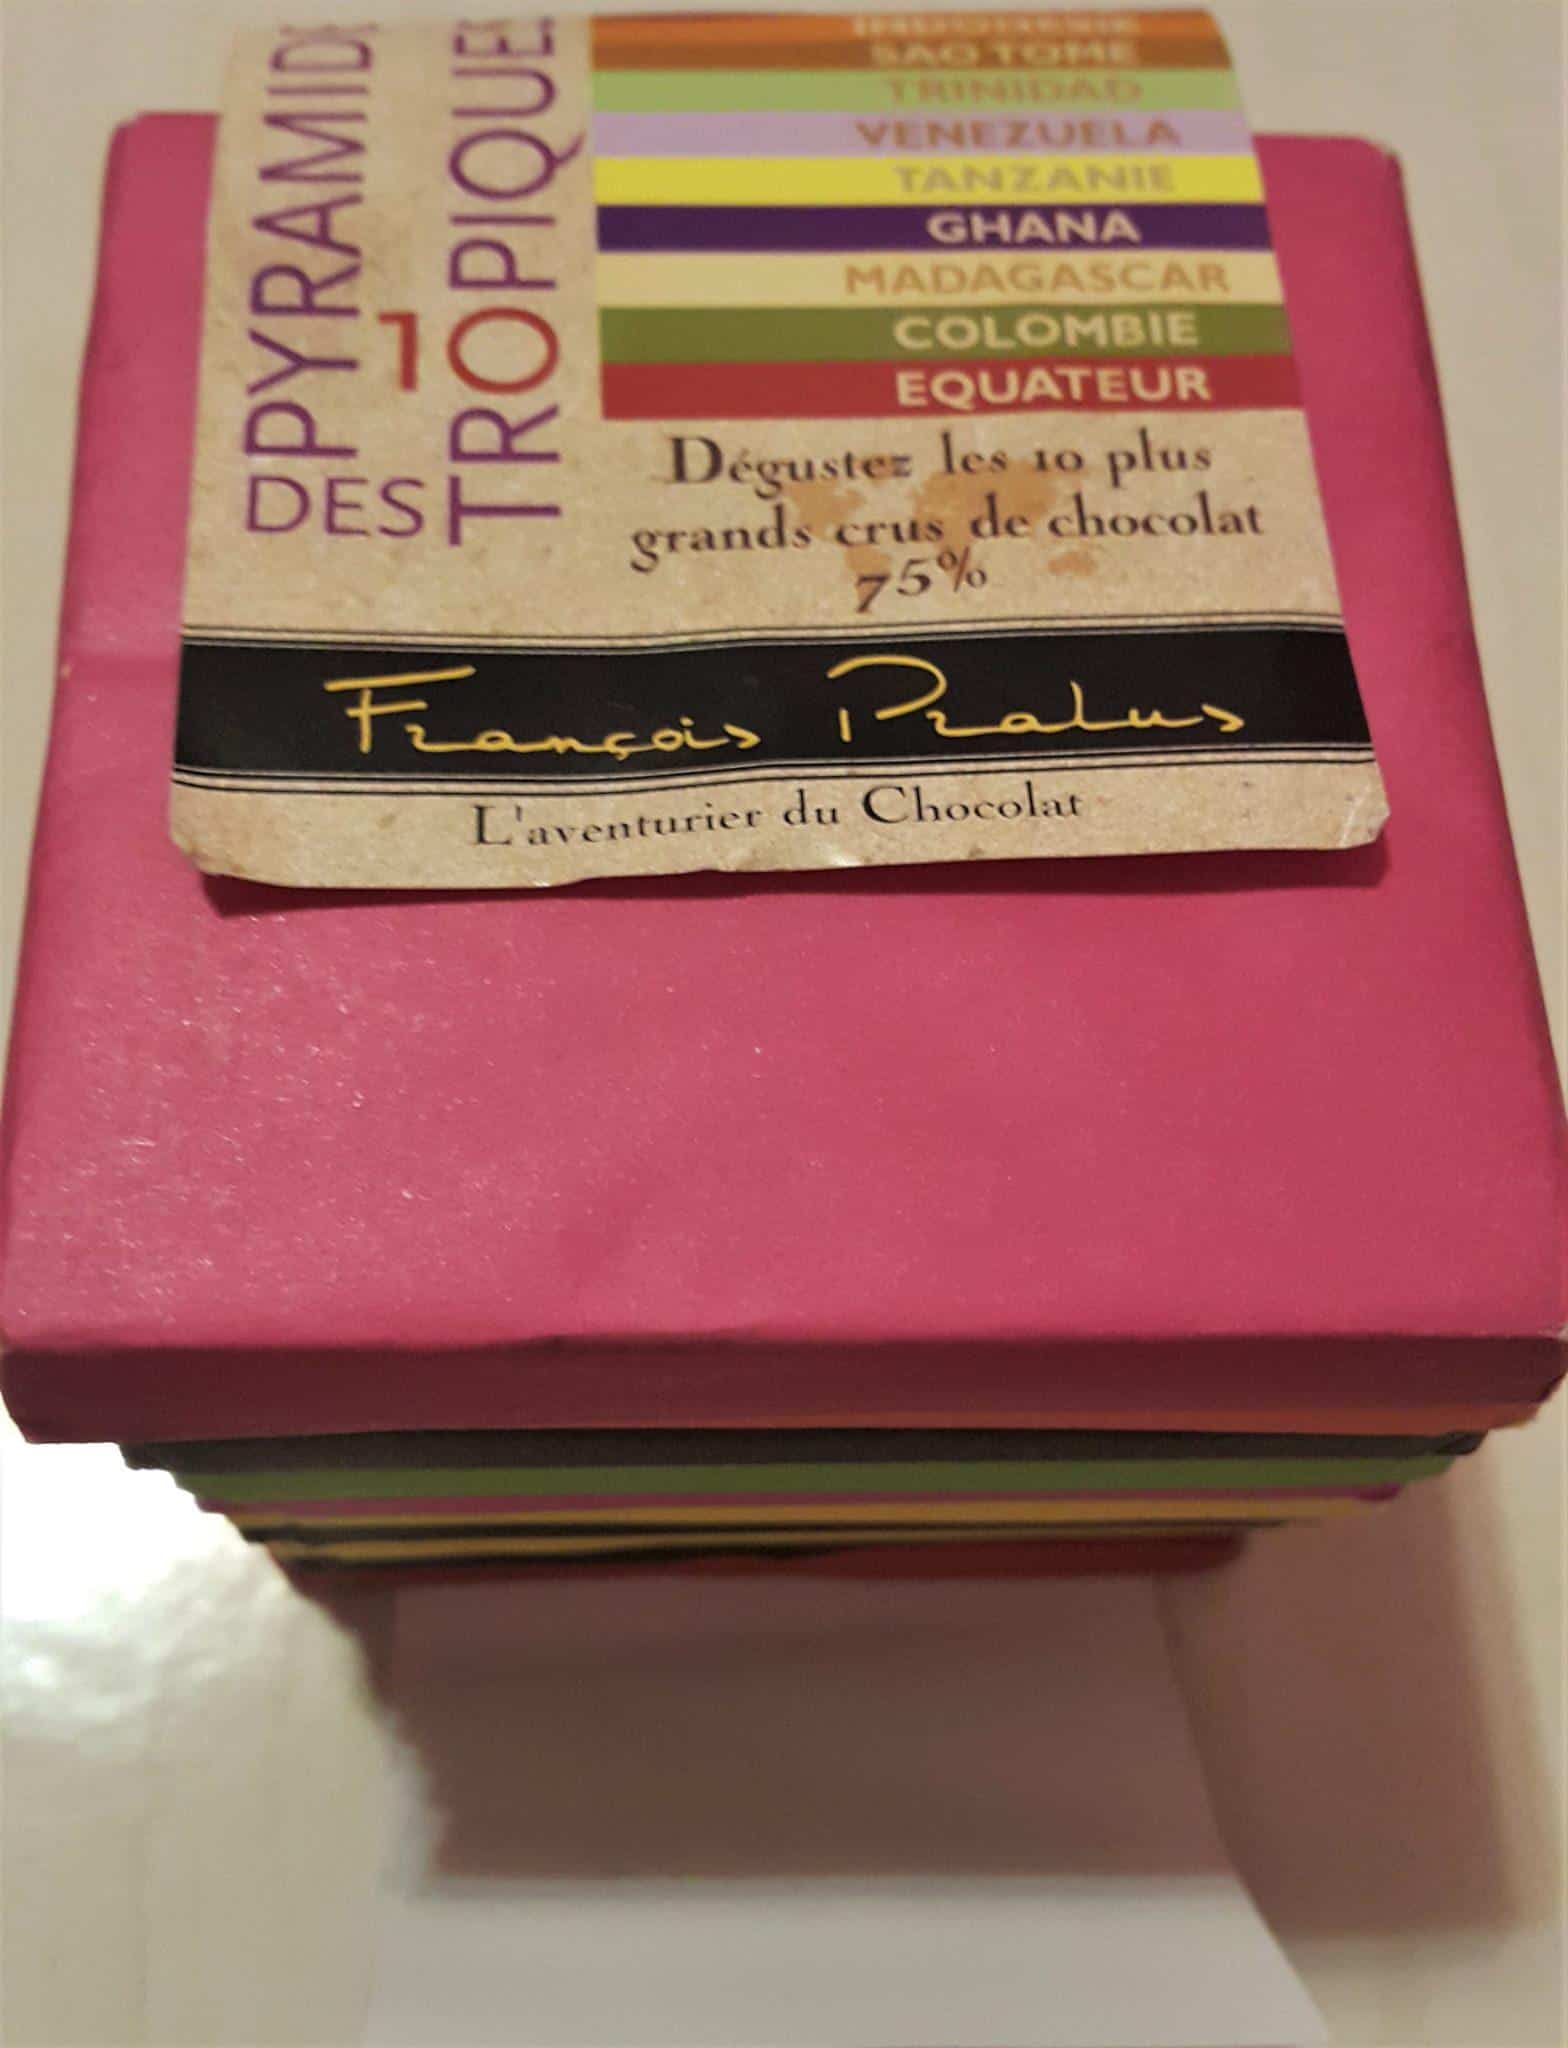 Francois Pralus Pyramid Tropicale 10 bars bean to bar french chocolate